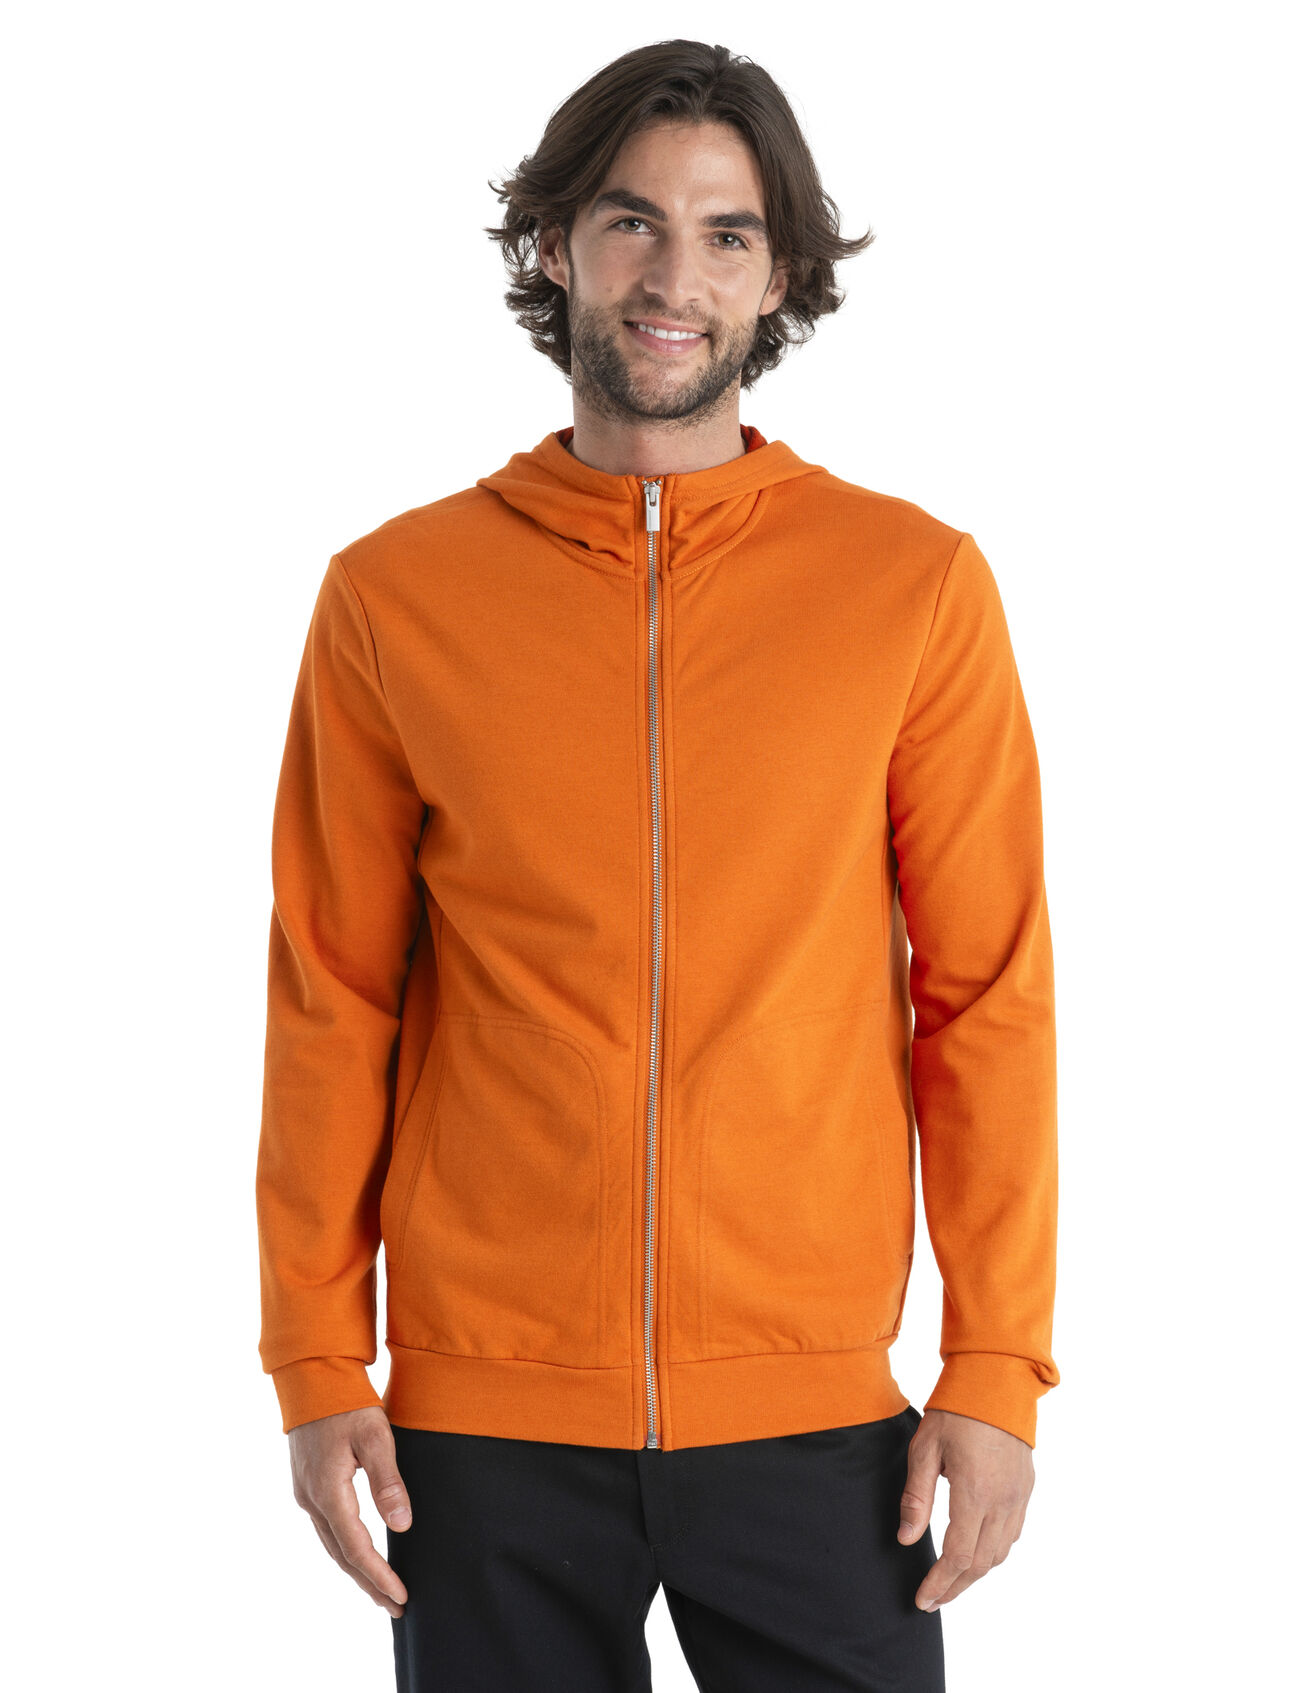 Men's Running Hoodies – Stay warm and layer up